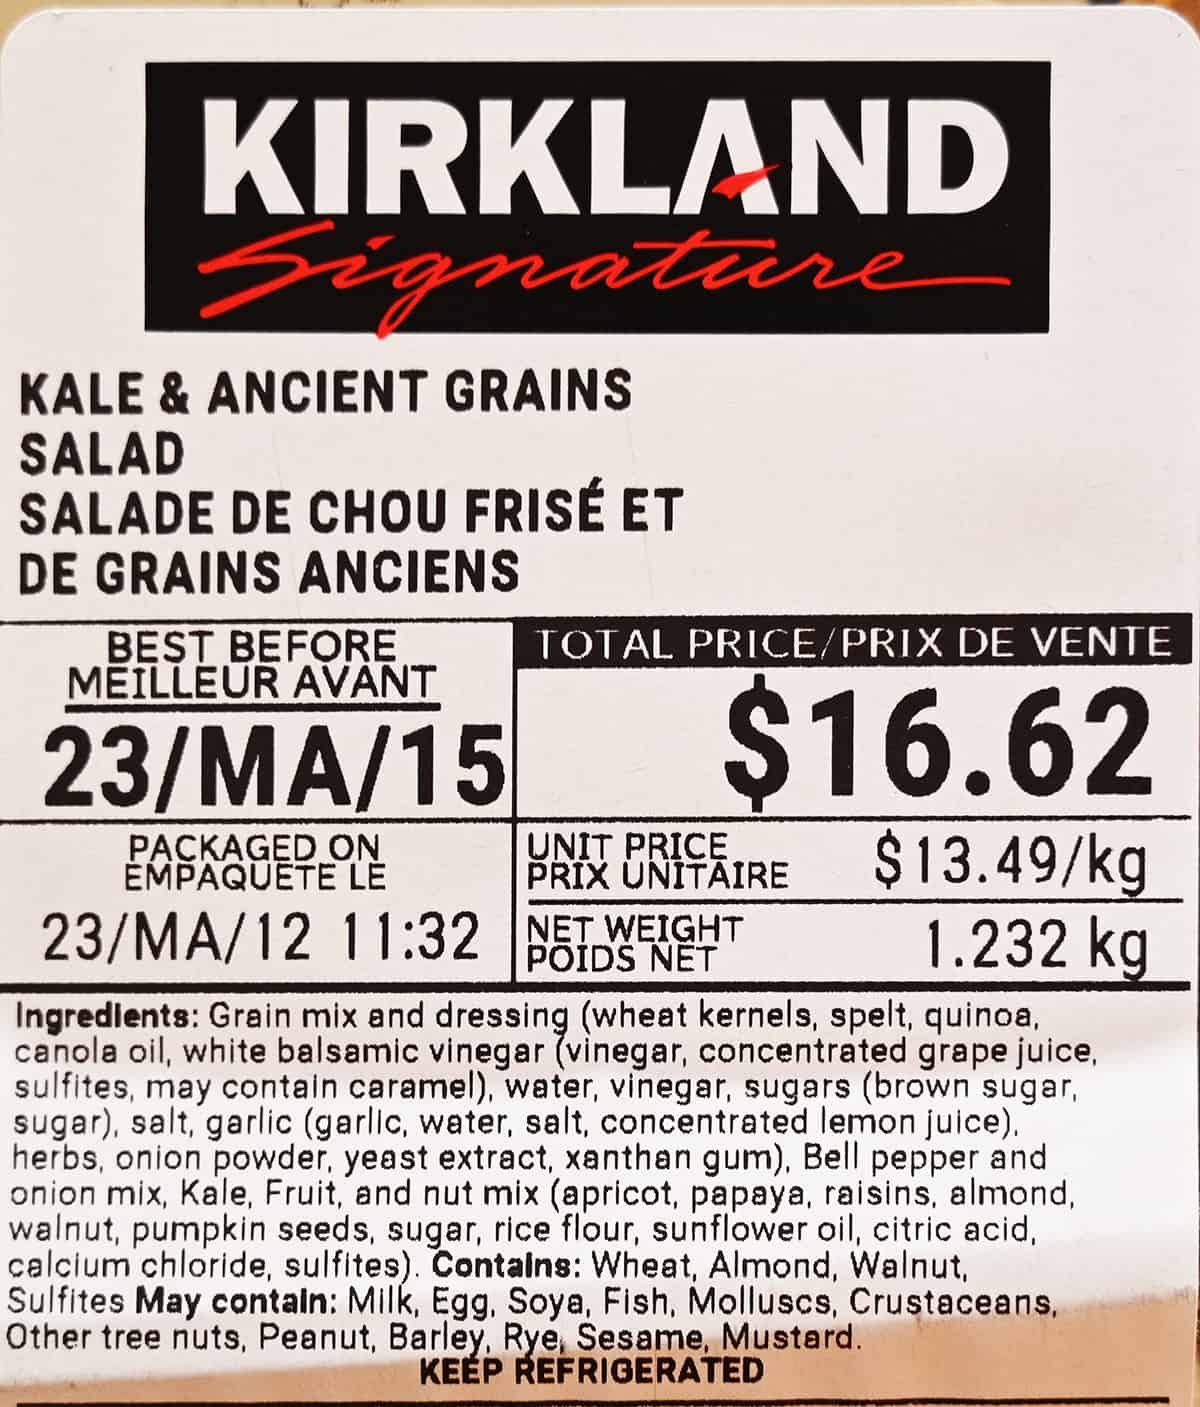 Closeup image of the front label on the salad showing best before date and cost.